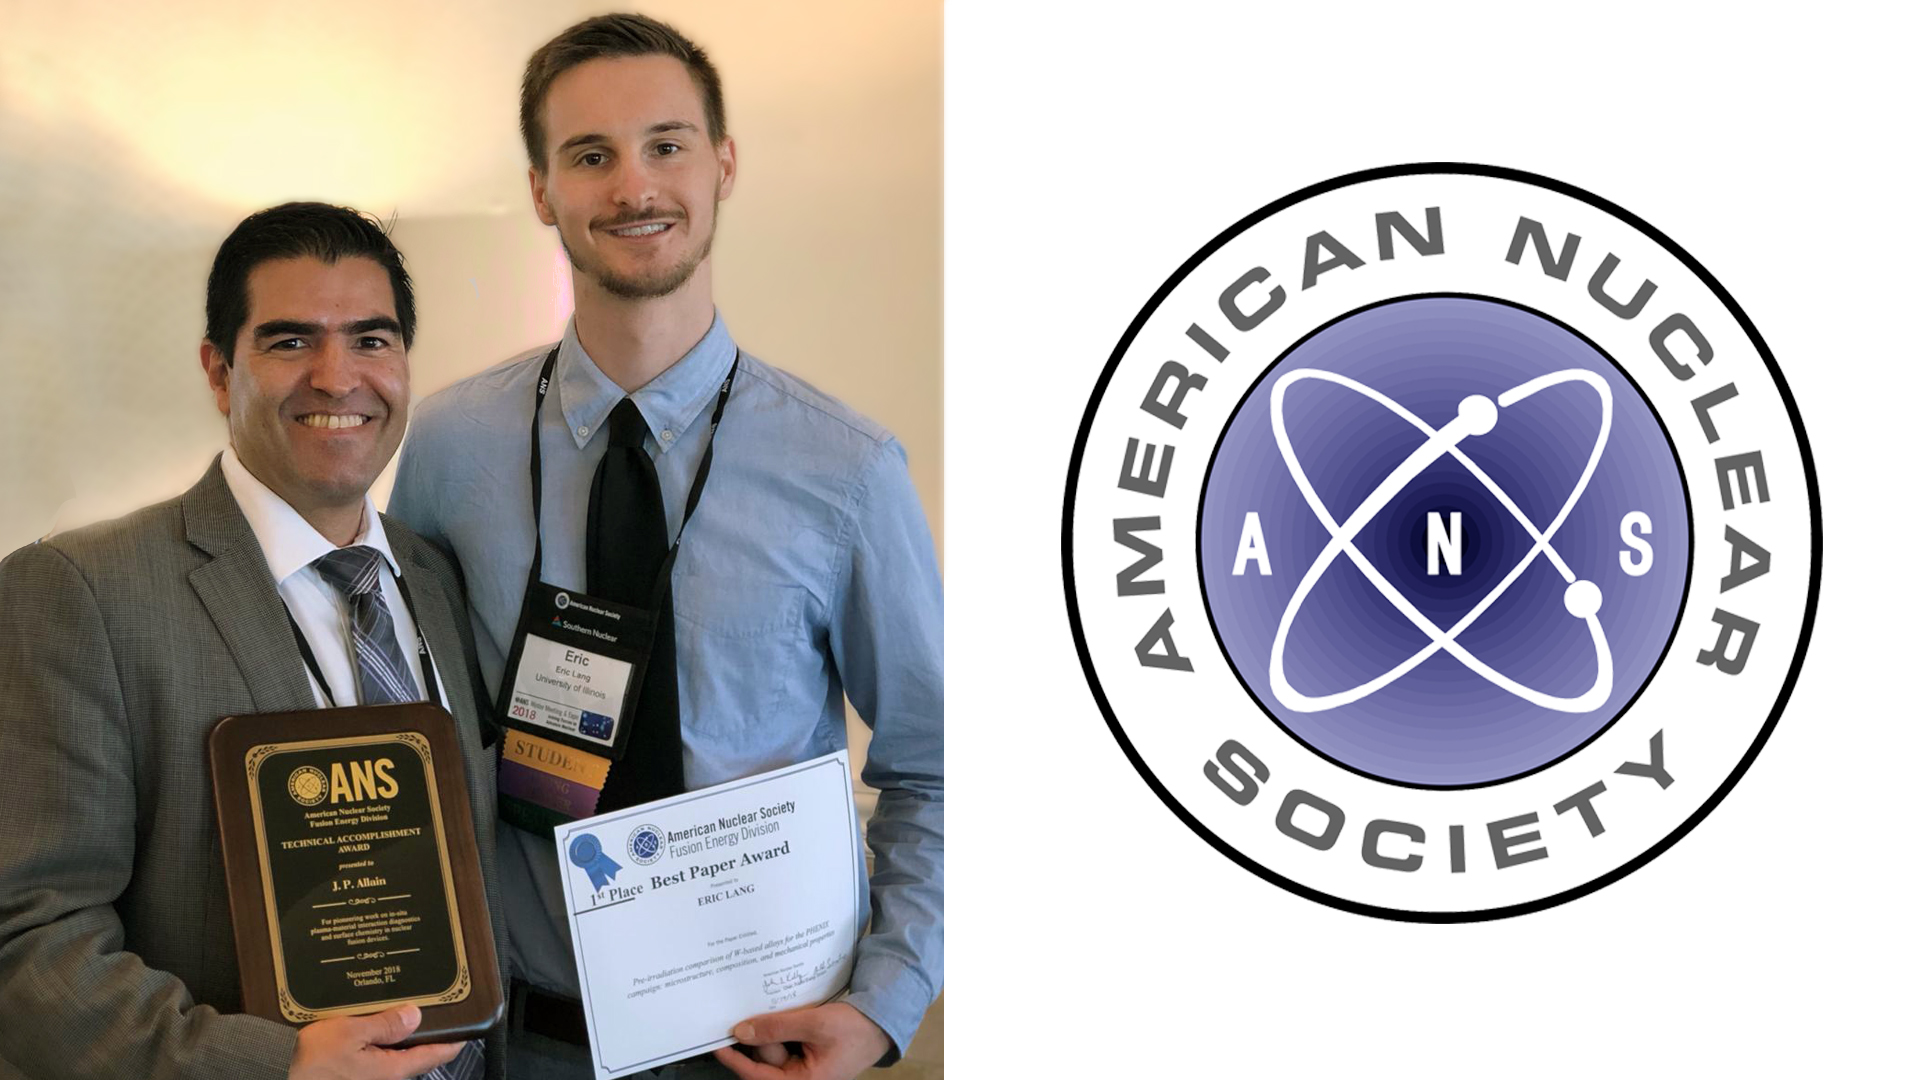 Eric Lang awarded Best Student Paper at national fusion energy meeting